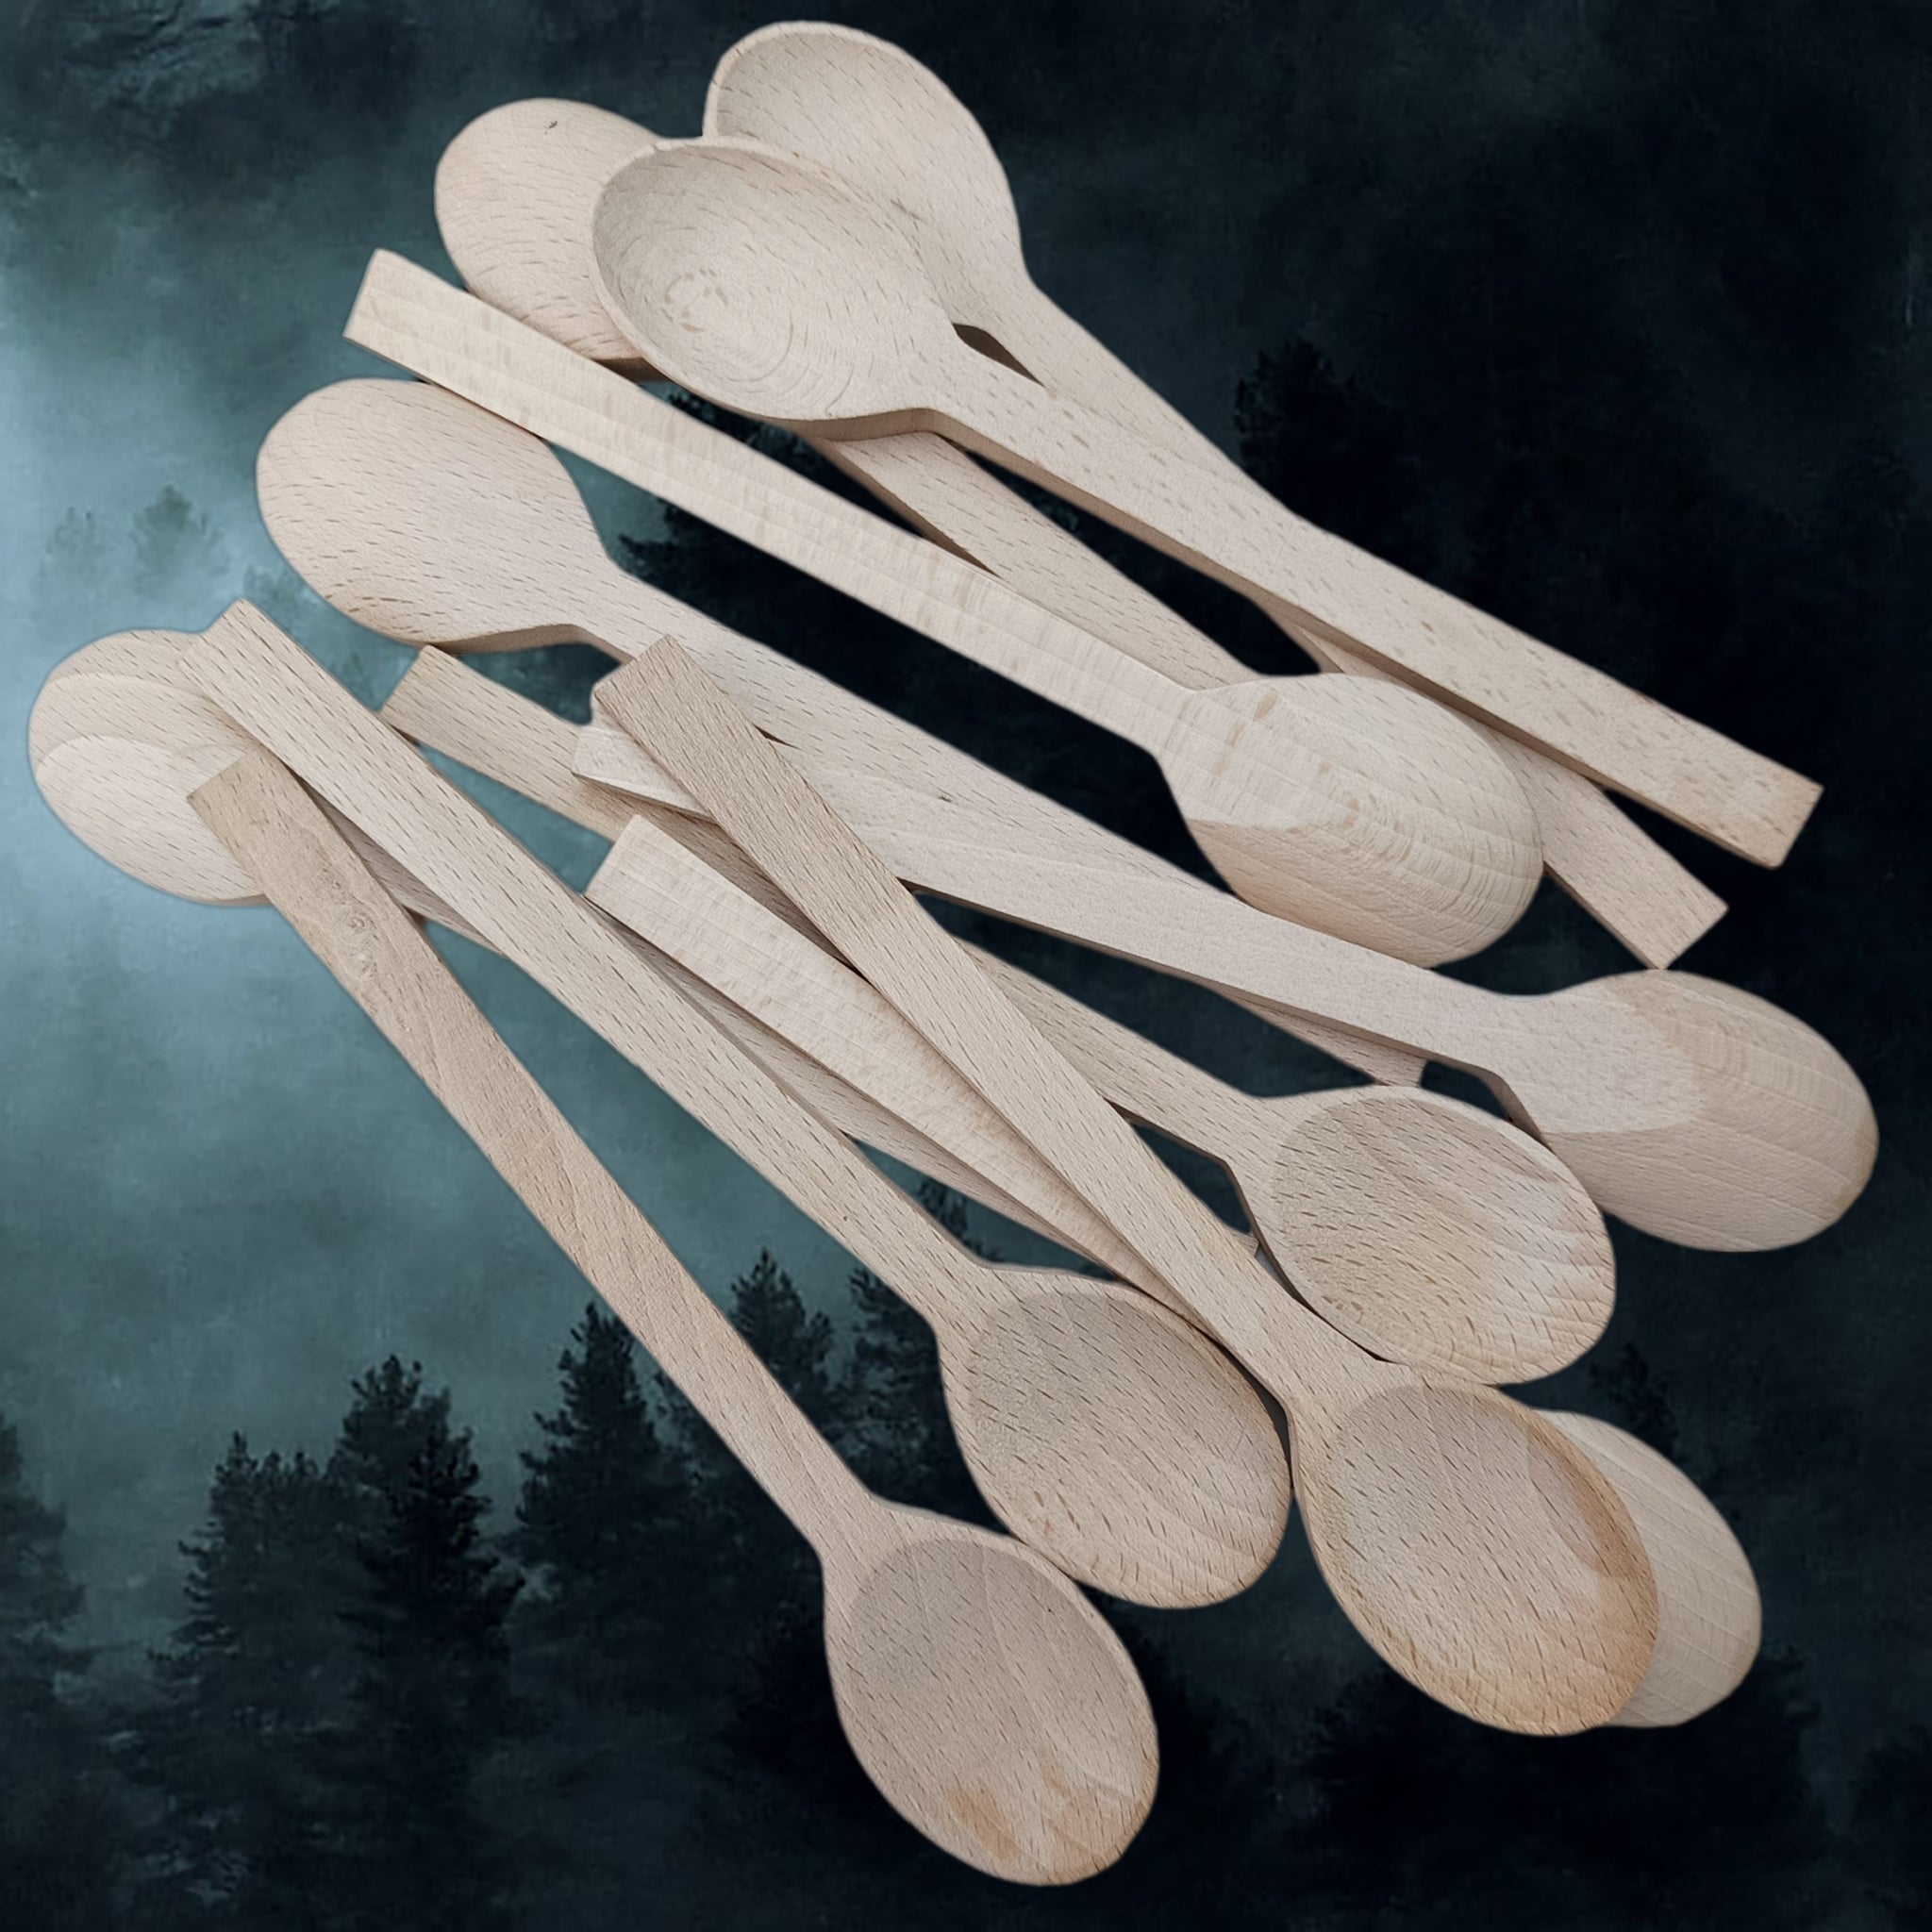 Large Wooden Viking / Medieval Spoons x 10